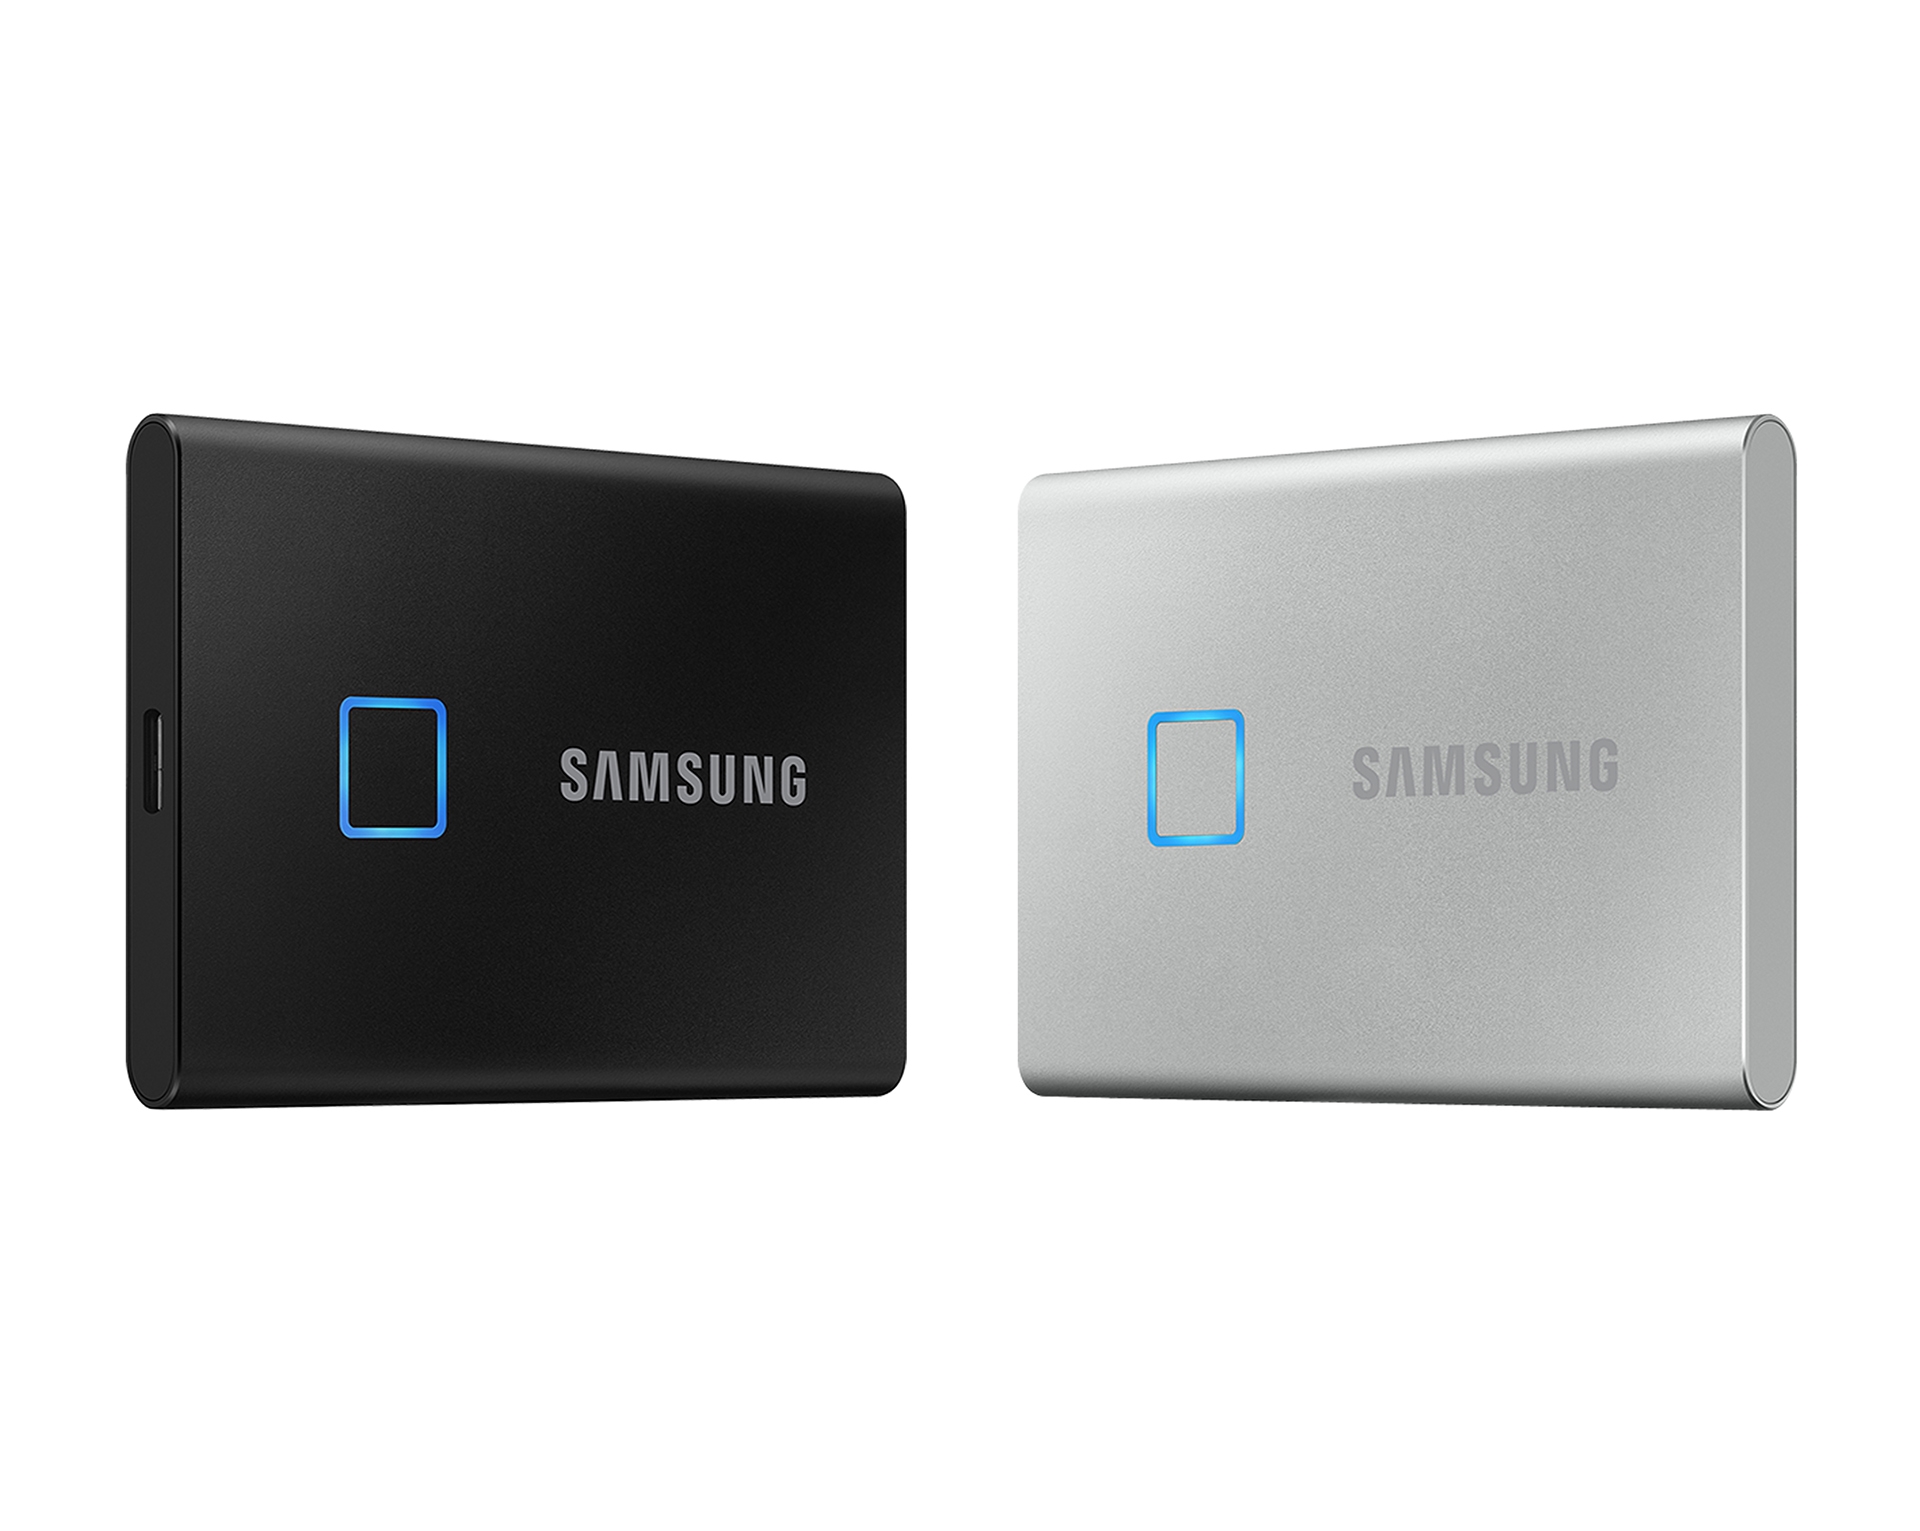 Samsung T7 Touch SSD in black and silver against a white background. | DeviceDaily.com